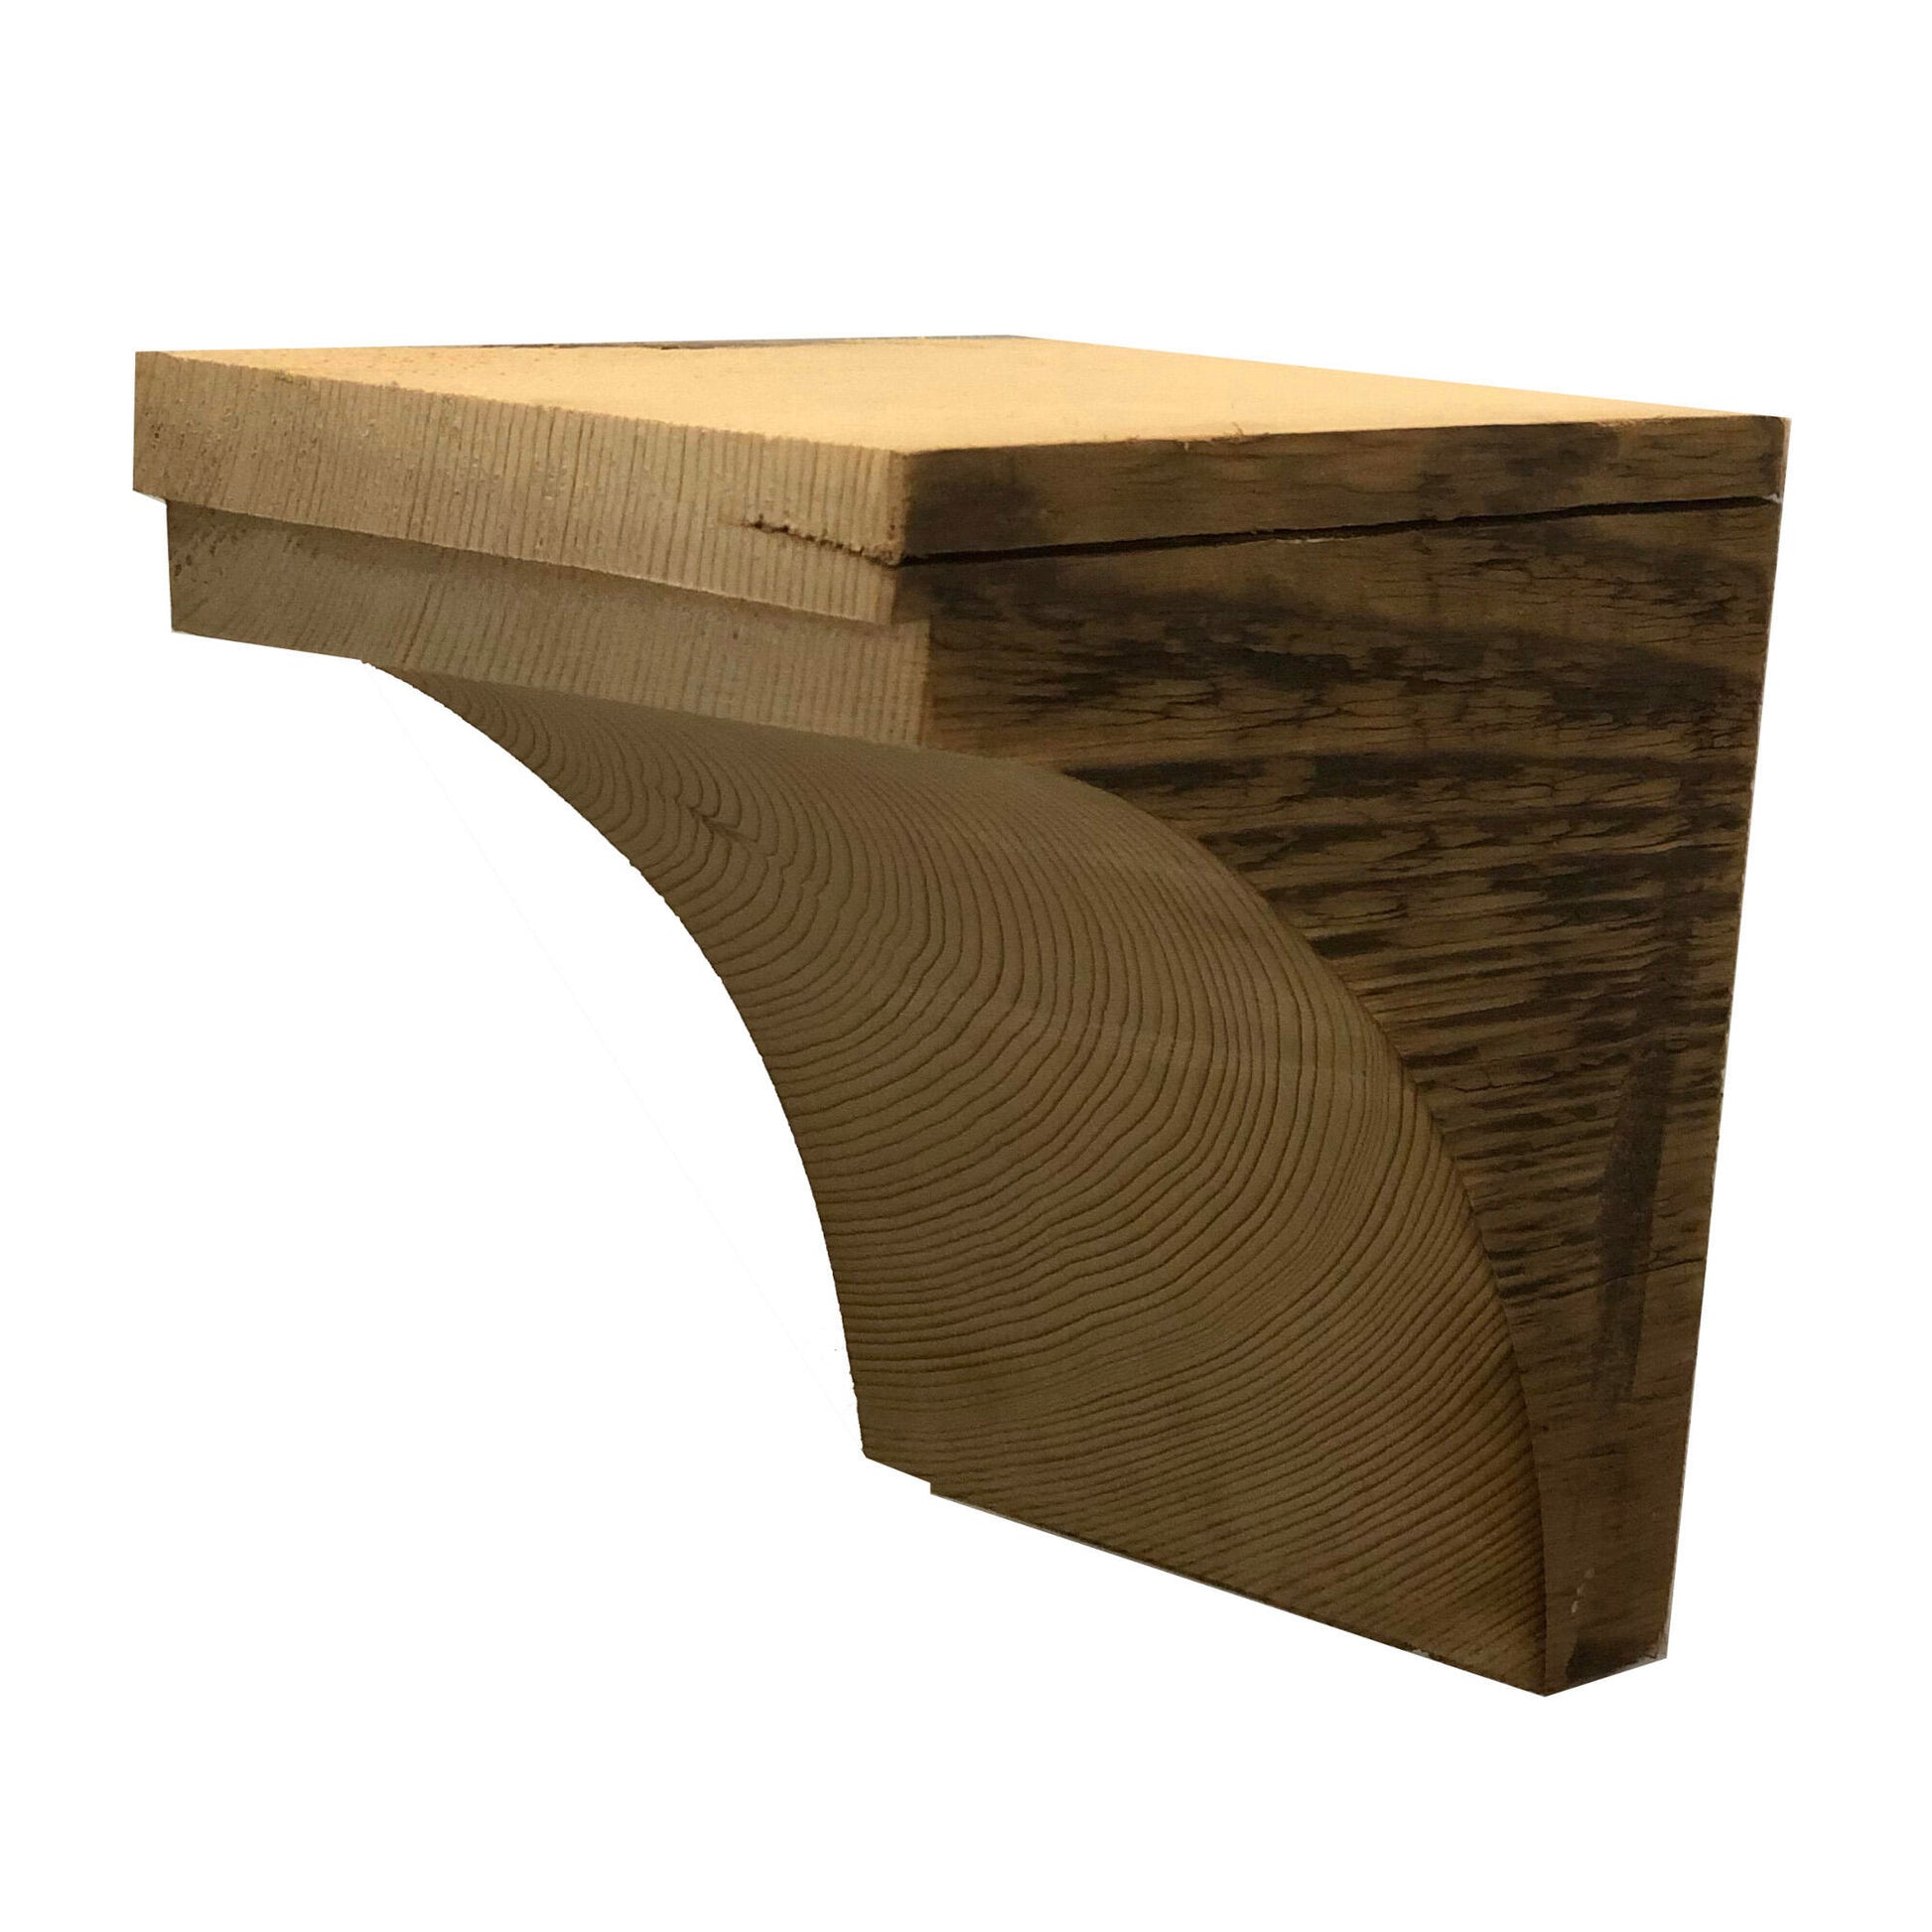 decorative corbel made from reclaimed barnwood. Wood grain displayed on the side and corbel shown in a decorative profile. There is one small step at the top of the corbel before the arch and another small step at the bottom.